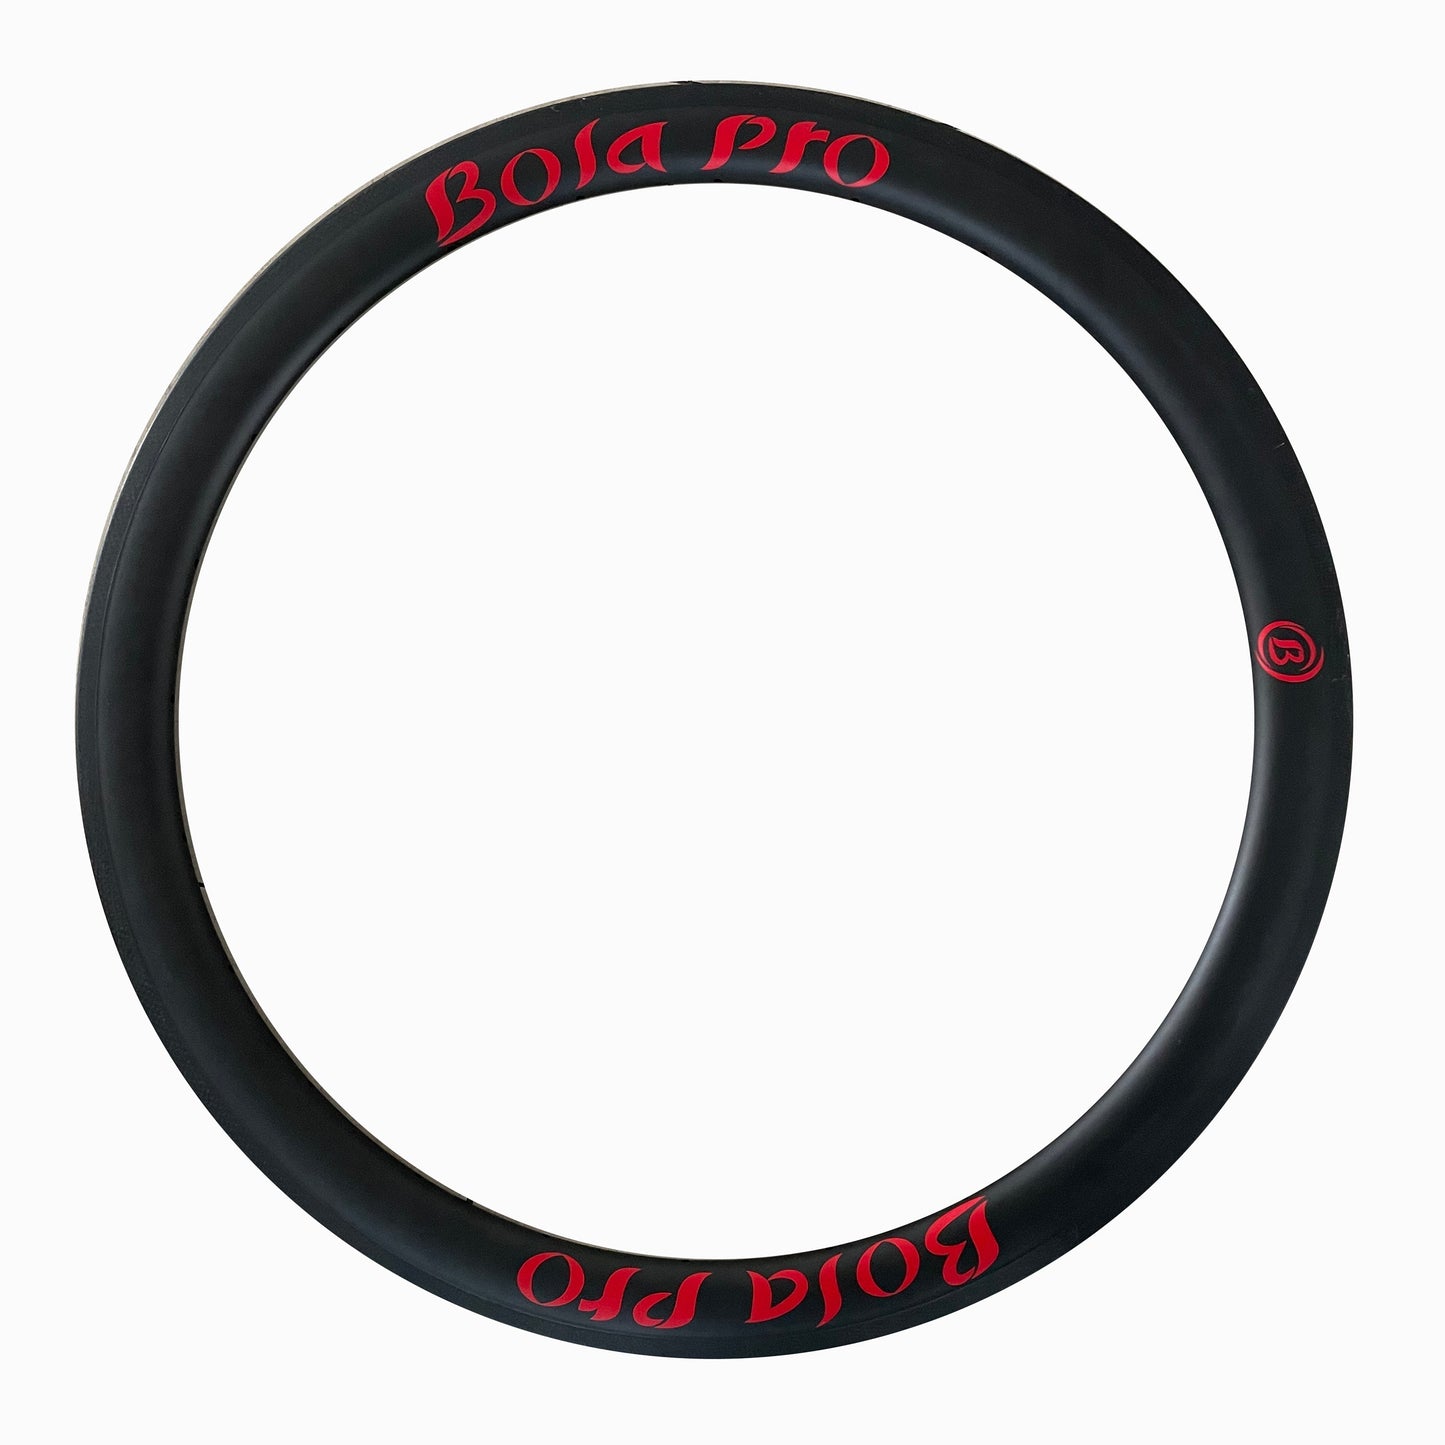 Asymmetric 29" feather light MTB hookless carbon tubeless rims 23mm profile 32mm inner wide XC or AM Bola